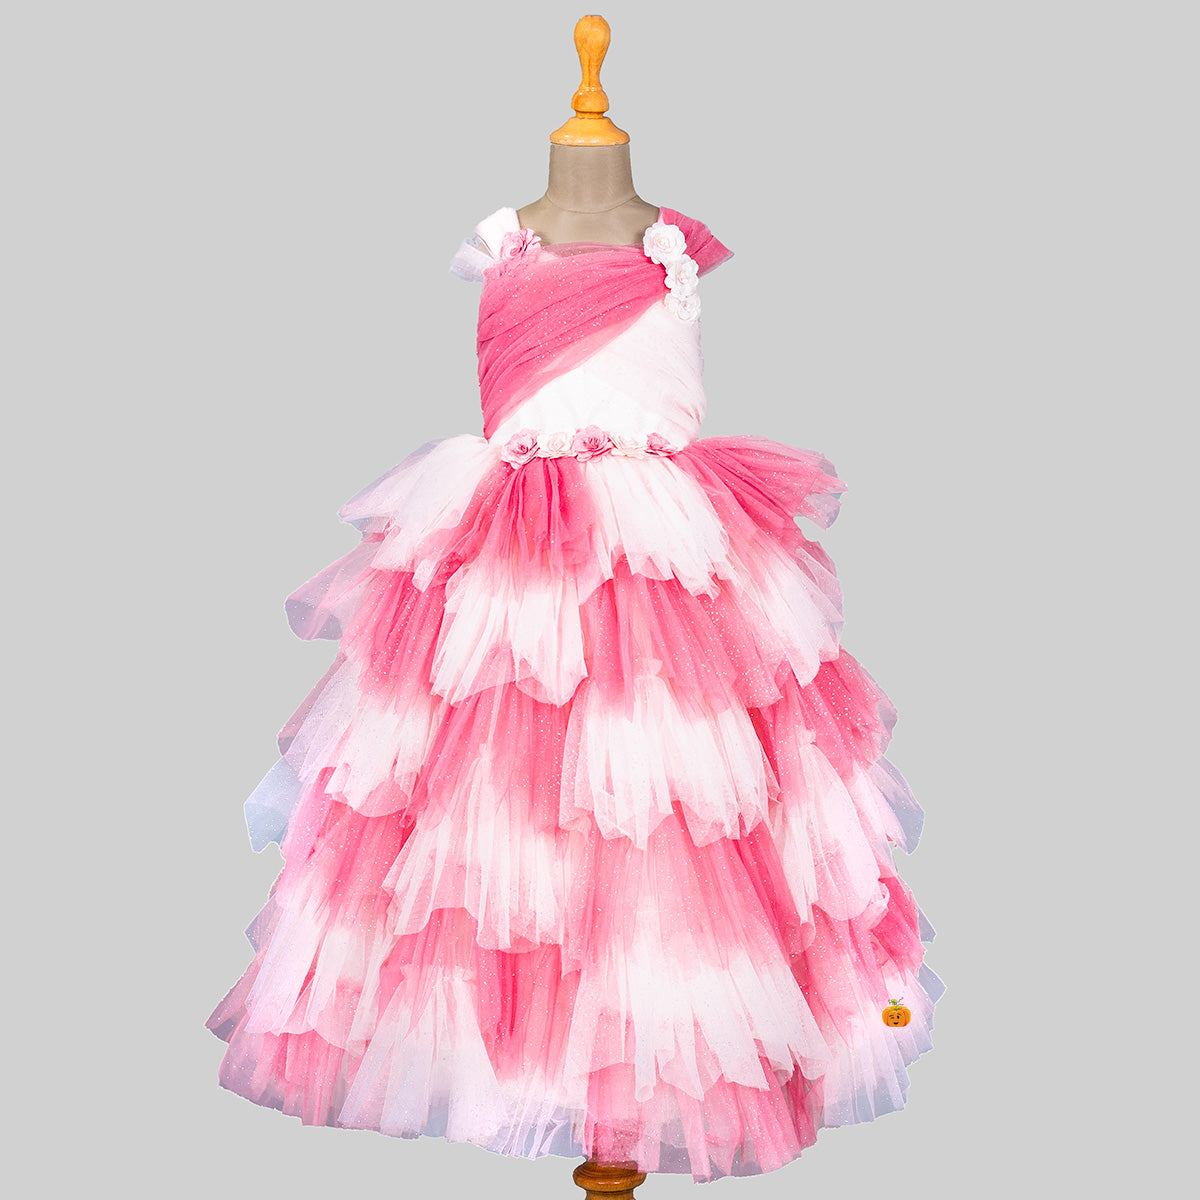 Holiday Savings Deals! Kukoosong Toddler Baby Girls Dress Color Net Yarn  Bowknot Birthday Party Flowers Gown Kids Dresses Pink 7-8 Years -  Walmart.com